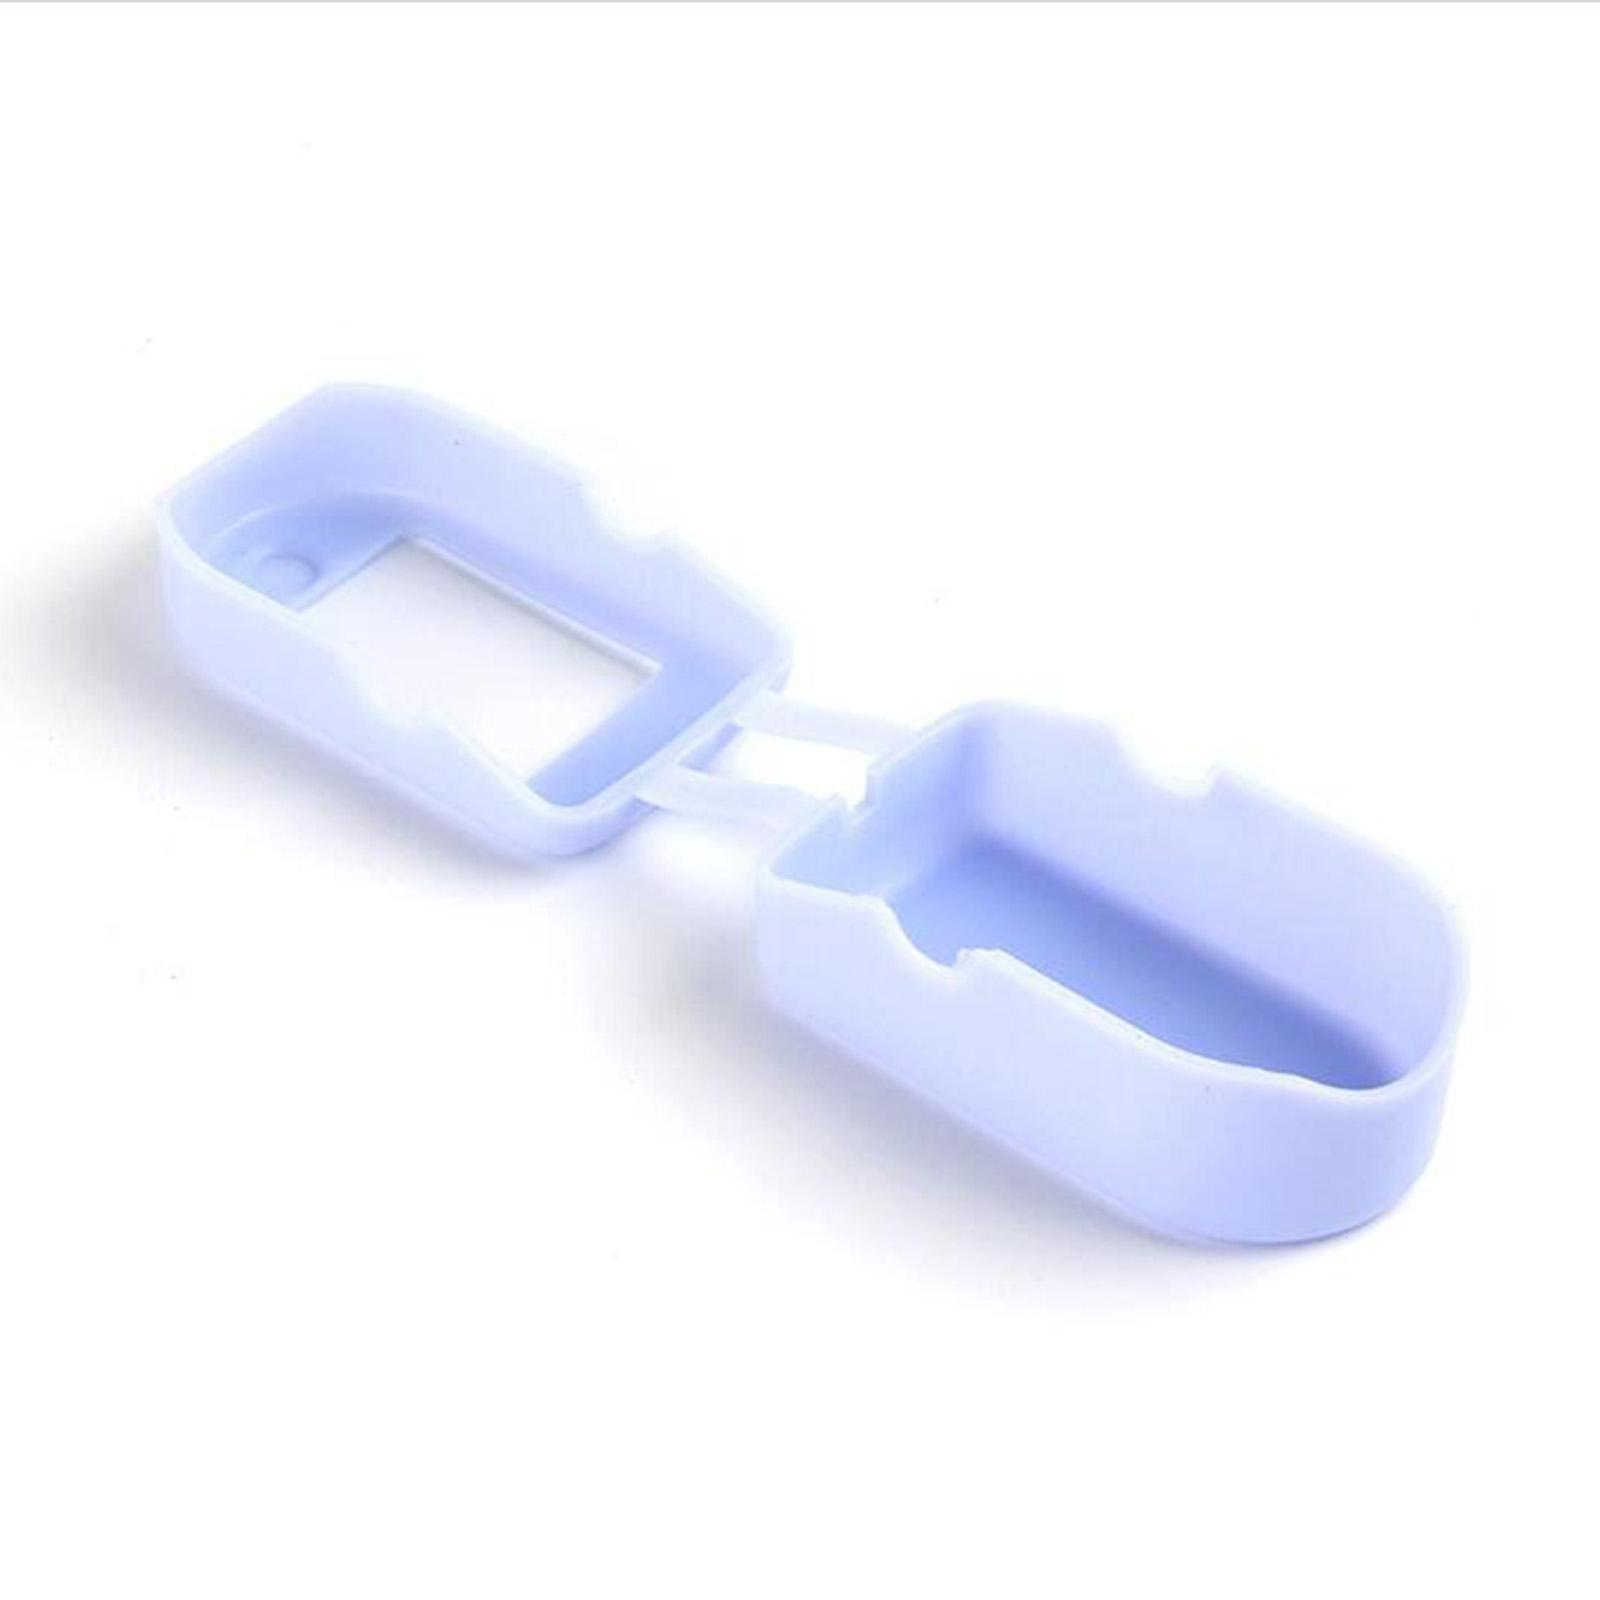 Blood Oxygen Case Silicone Fingertip Pulse Cover for Outdoor Travel Home Office Use, Easy to put on and take off, easy to use.